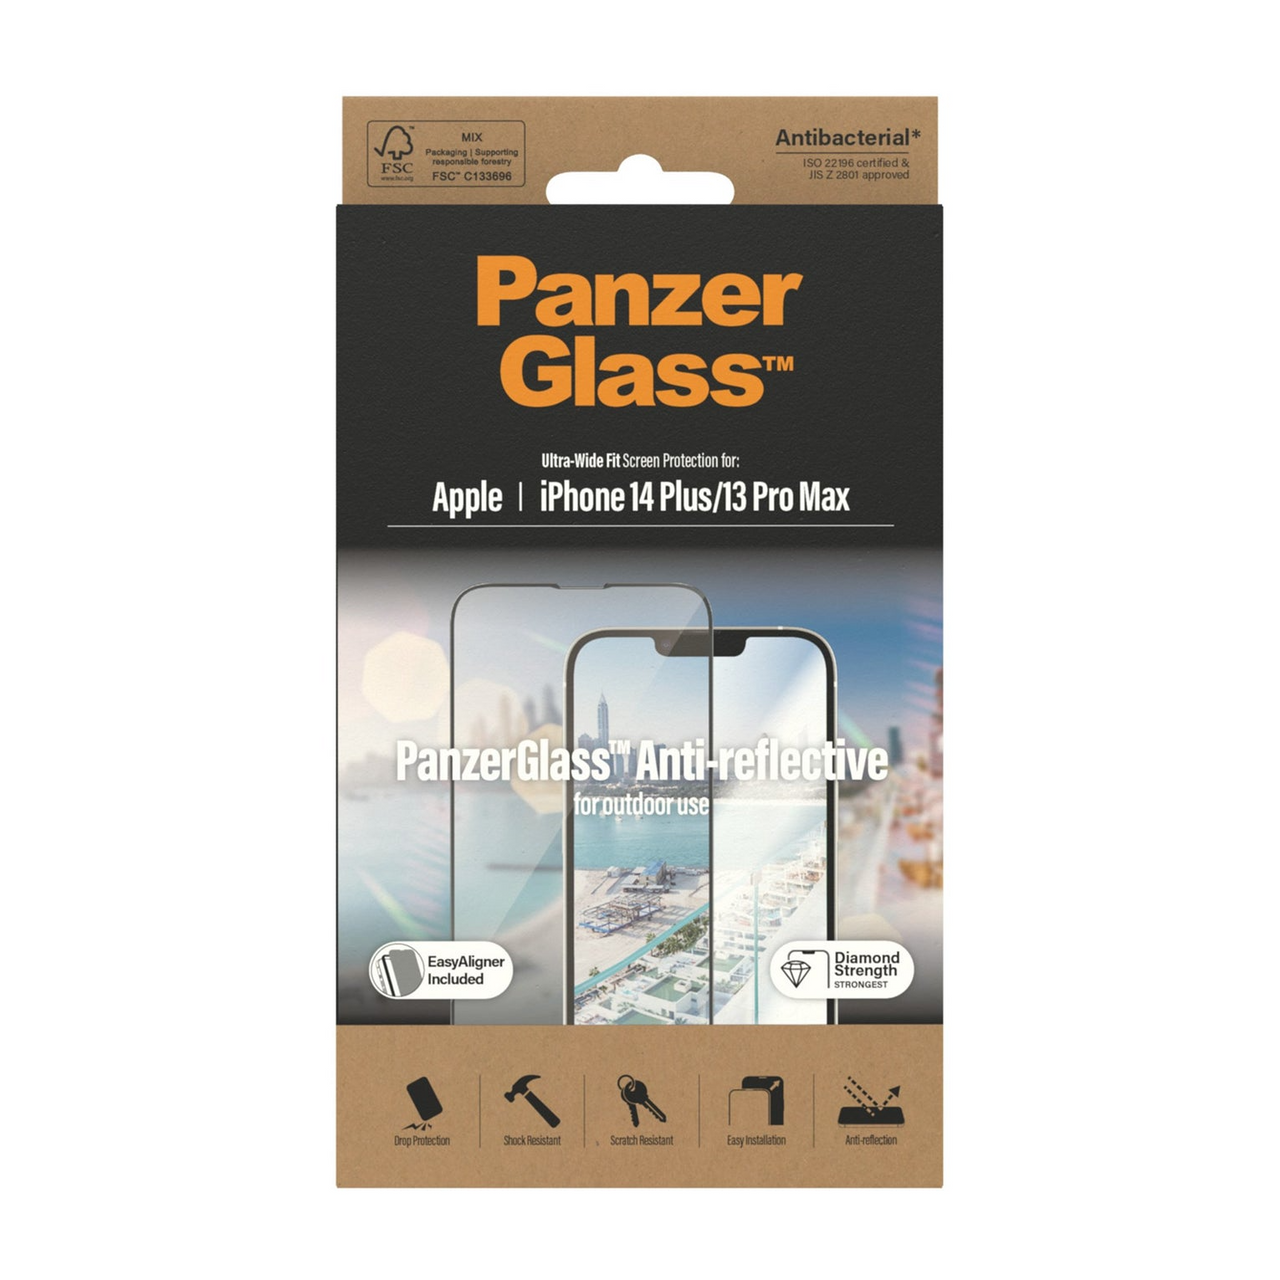 PanzerGlass Apple iPhone 14 Plus / iPhone 13 Pro Max Anti-Reflective Screen Protector Ultra-Wide Fit - Clear